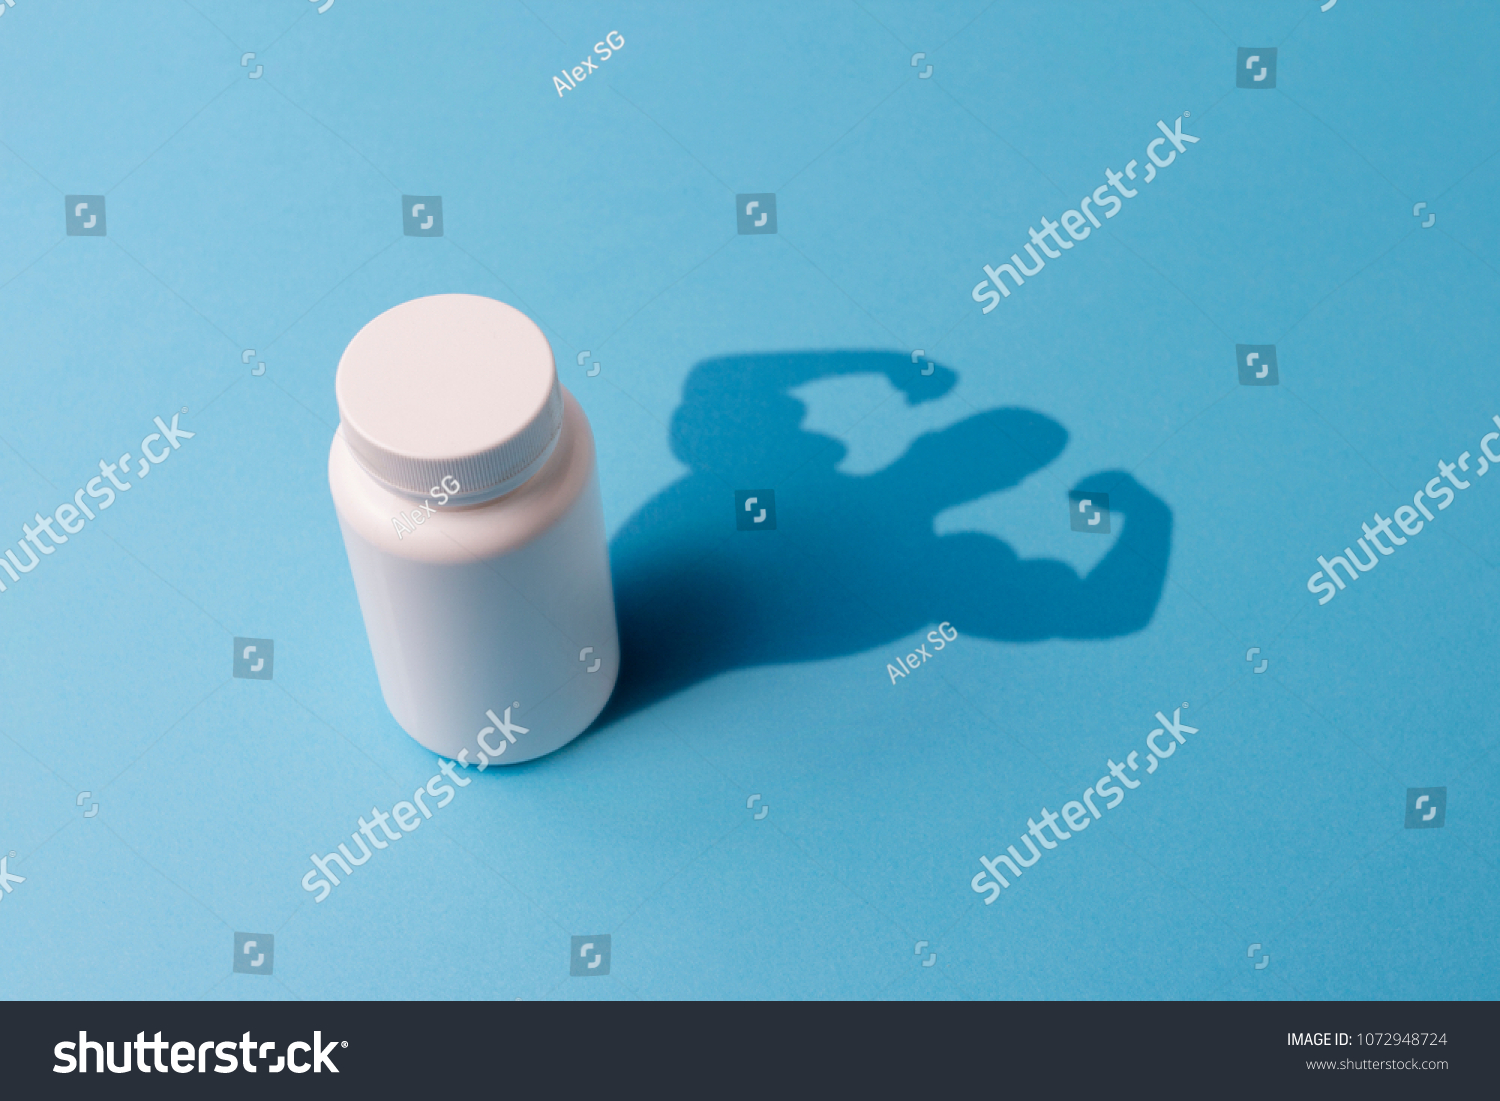 Plastic Bottle with Tablets and the Shadow with the Hands of the Bodybuilder. Concept of Steroids and Pharmaceutical Preparations for Bodybuilders. Pharmaceutical Preparations for rapid muscle growth. #1072948724